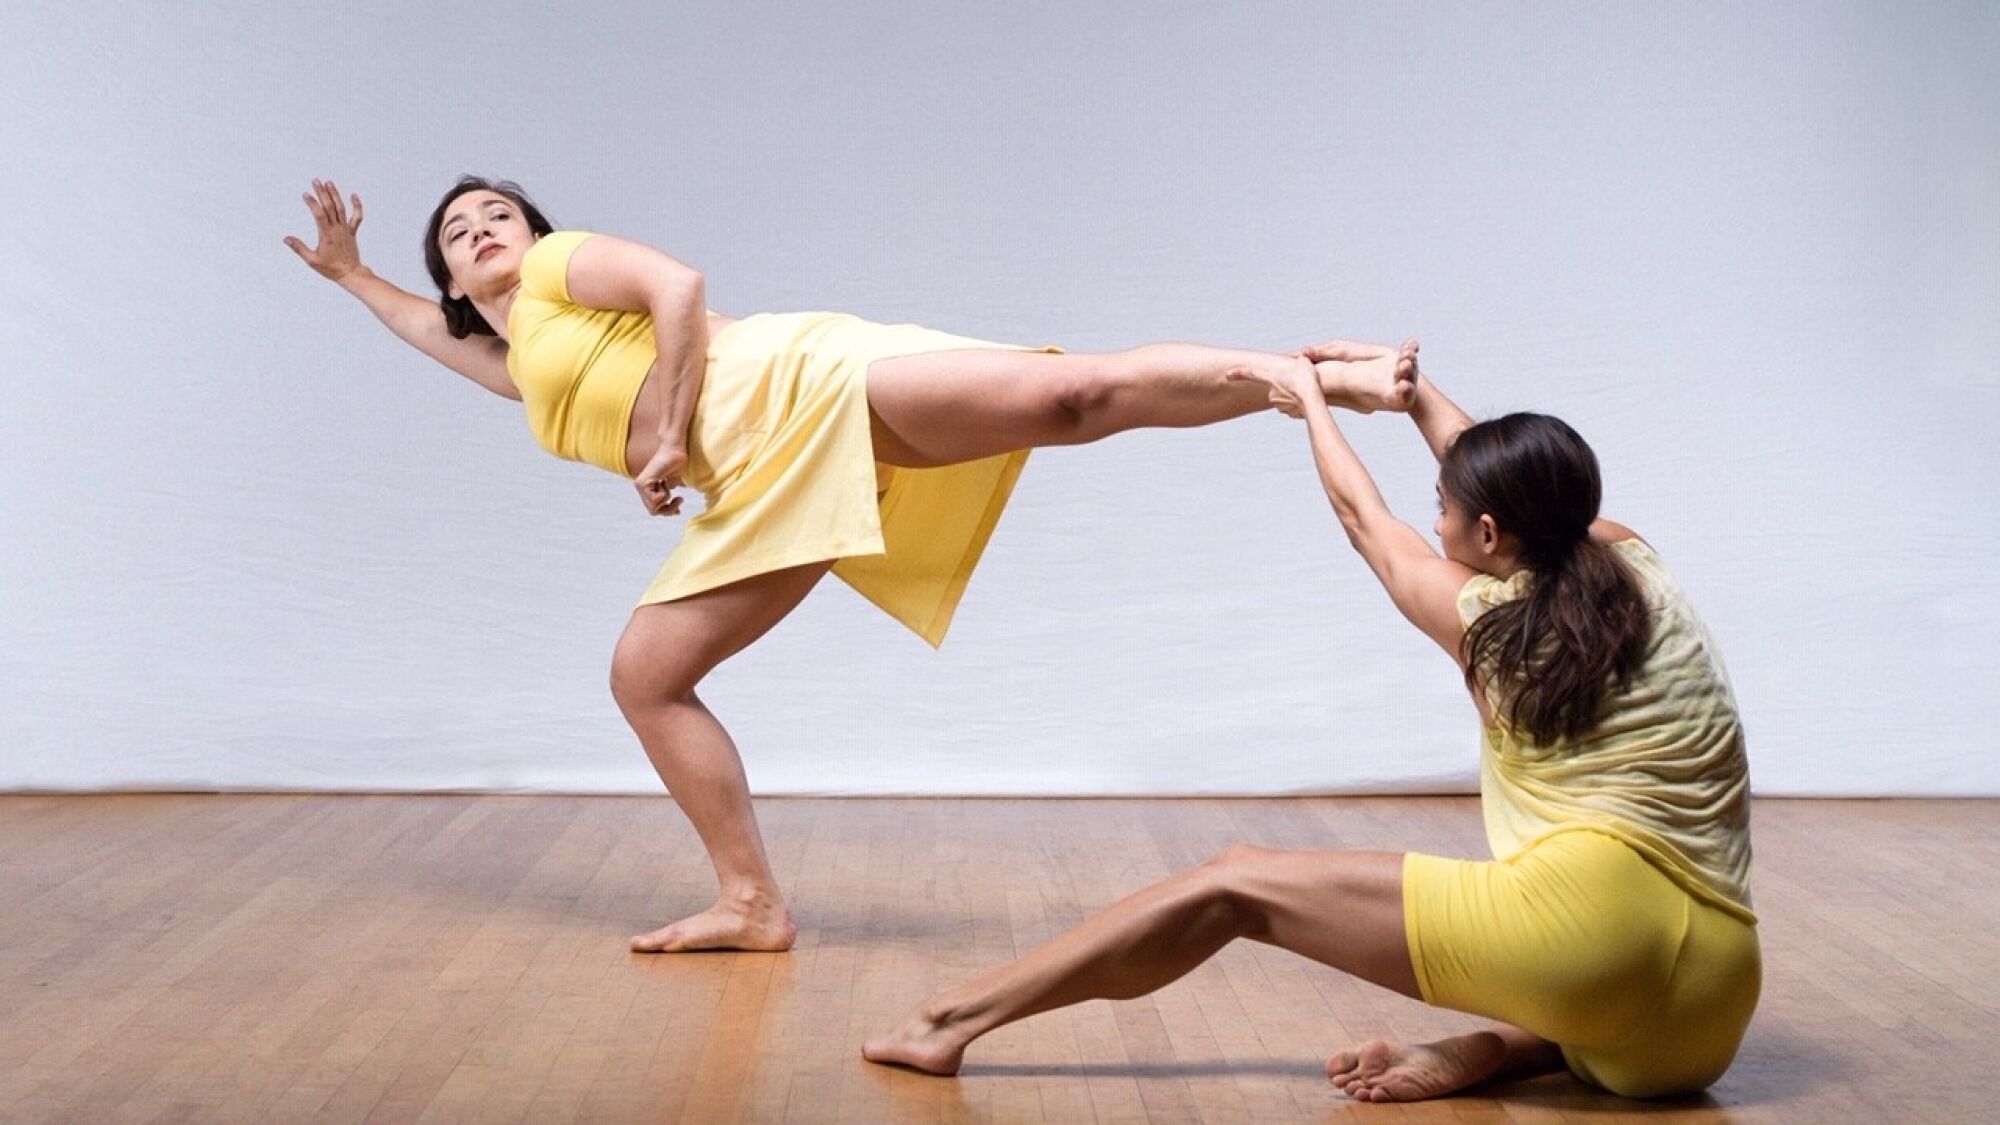 Two dancers, Emily Miller and Maria Jose Castillo, from the Encinitas-based dance company, LITVAKdance